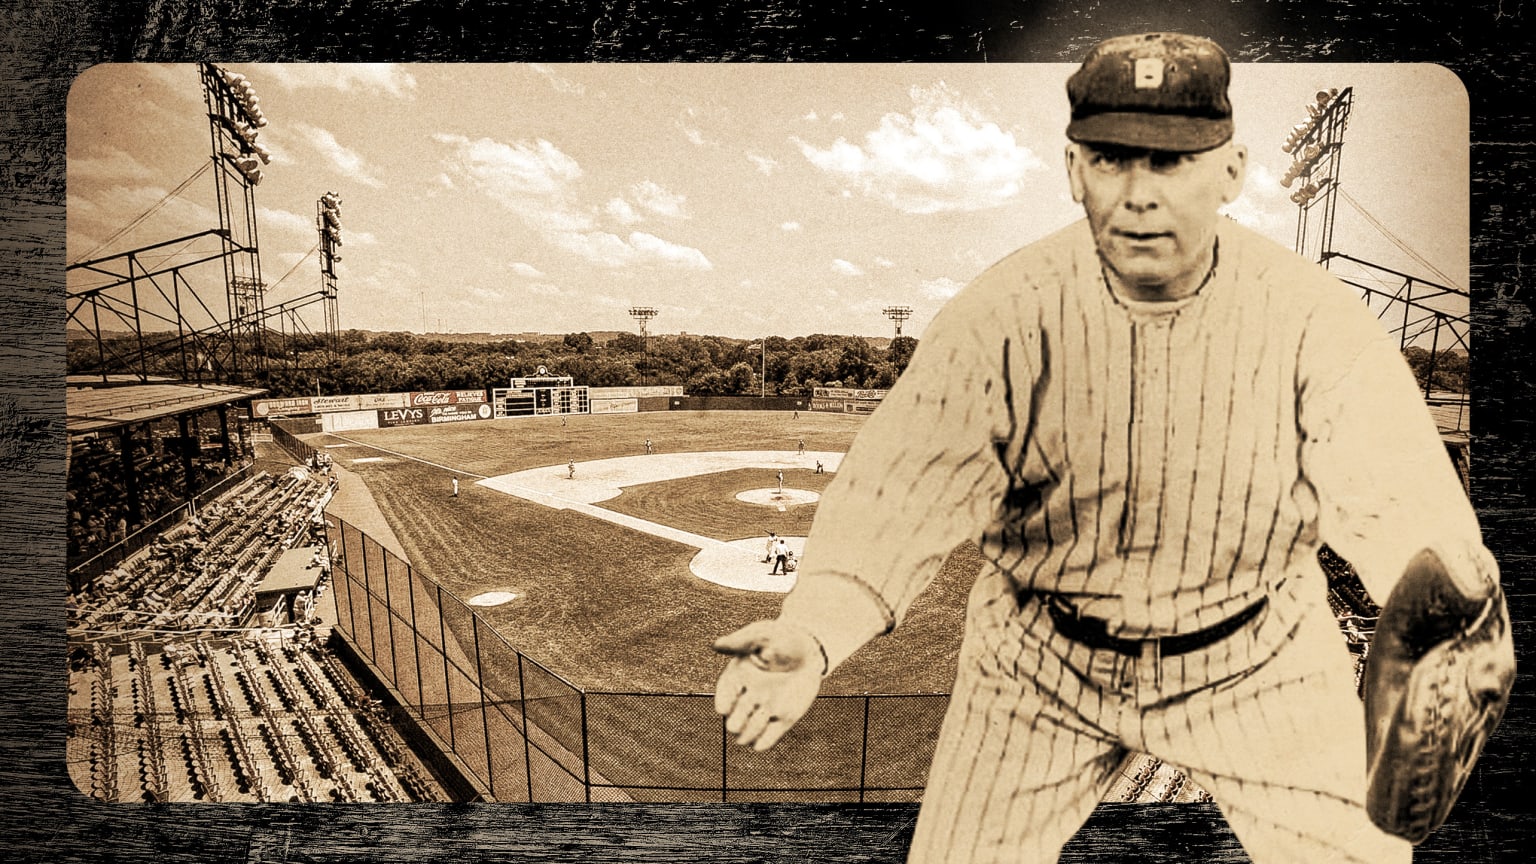 Owner of Rickwood Field threw the first pitch there -- and it wasn't ceremonial